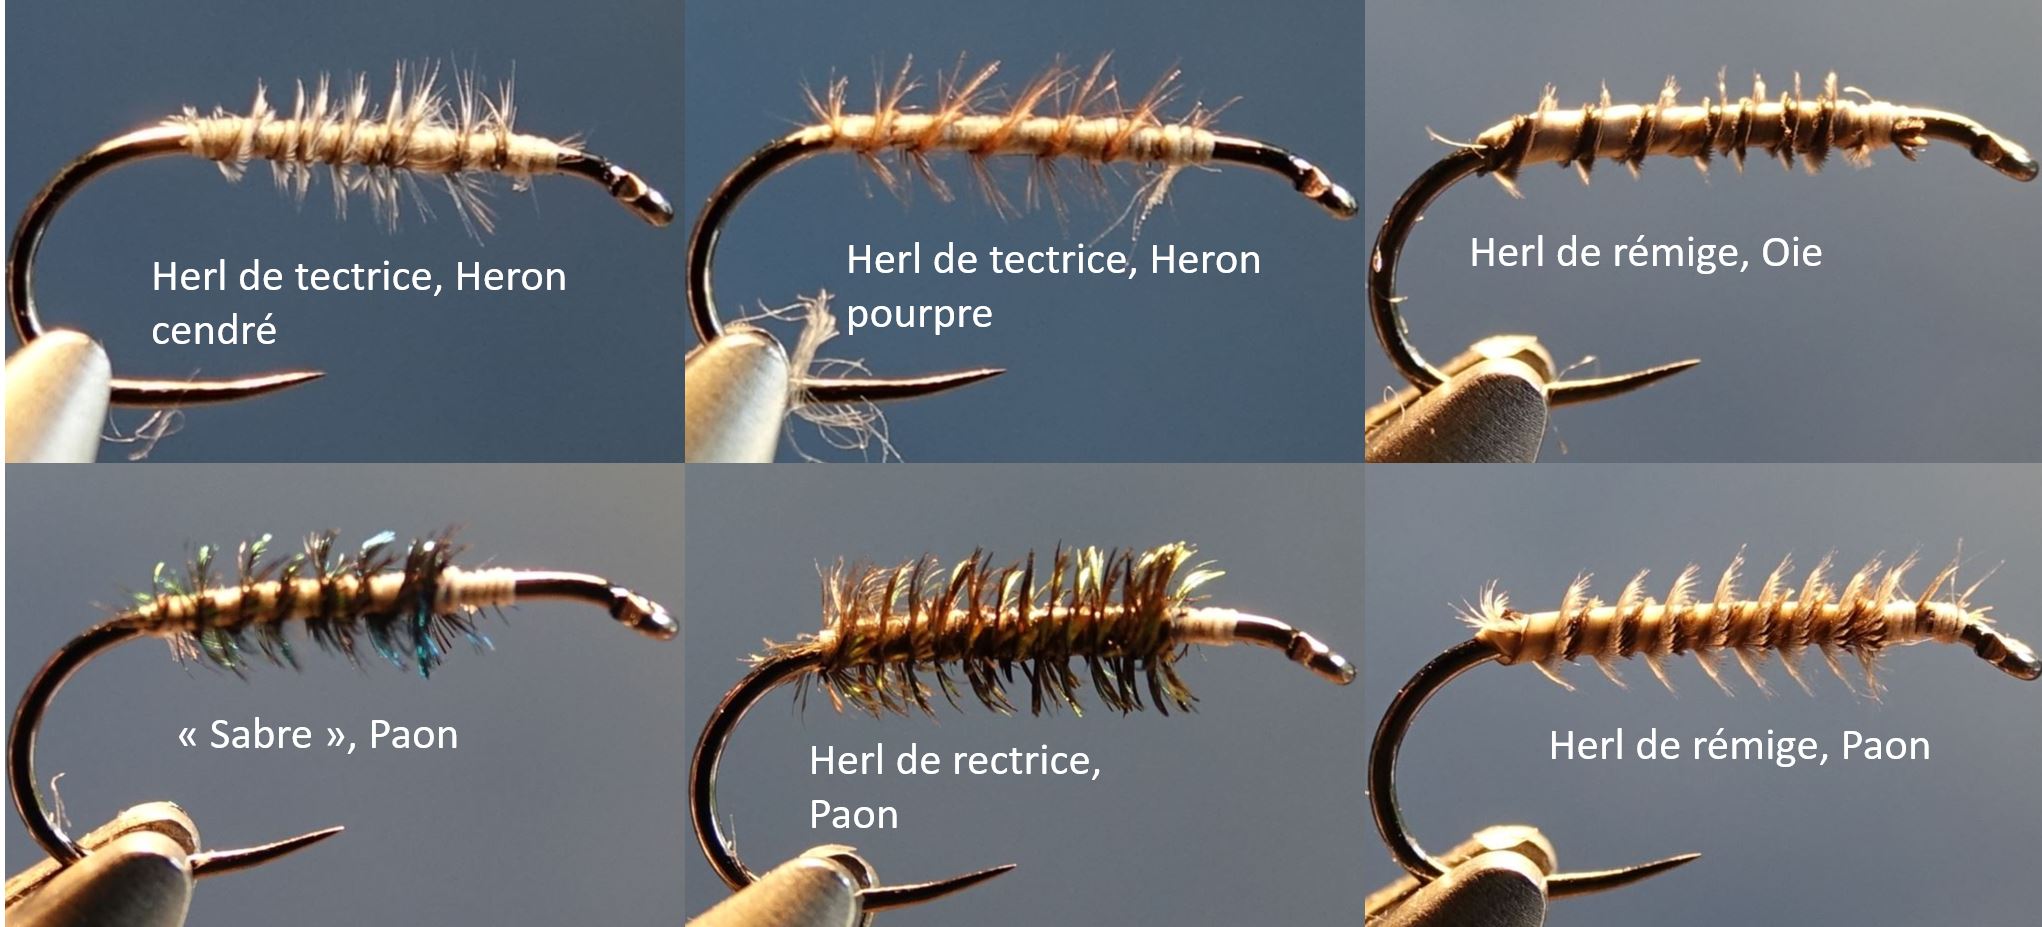 herl remige tectrice rectrice heron oie paon mouche plume fly tying eclosion